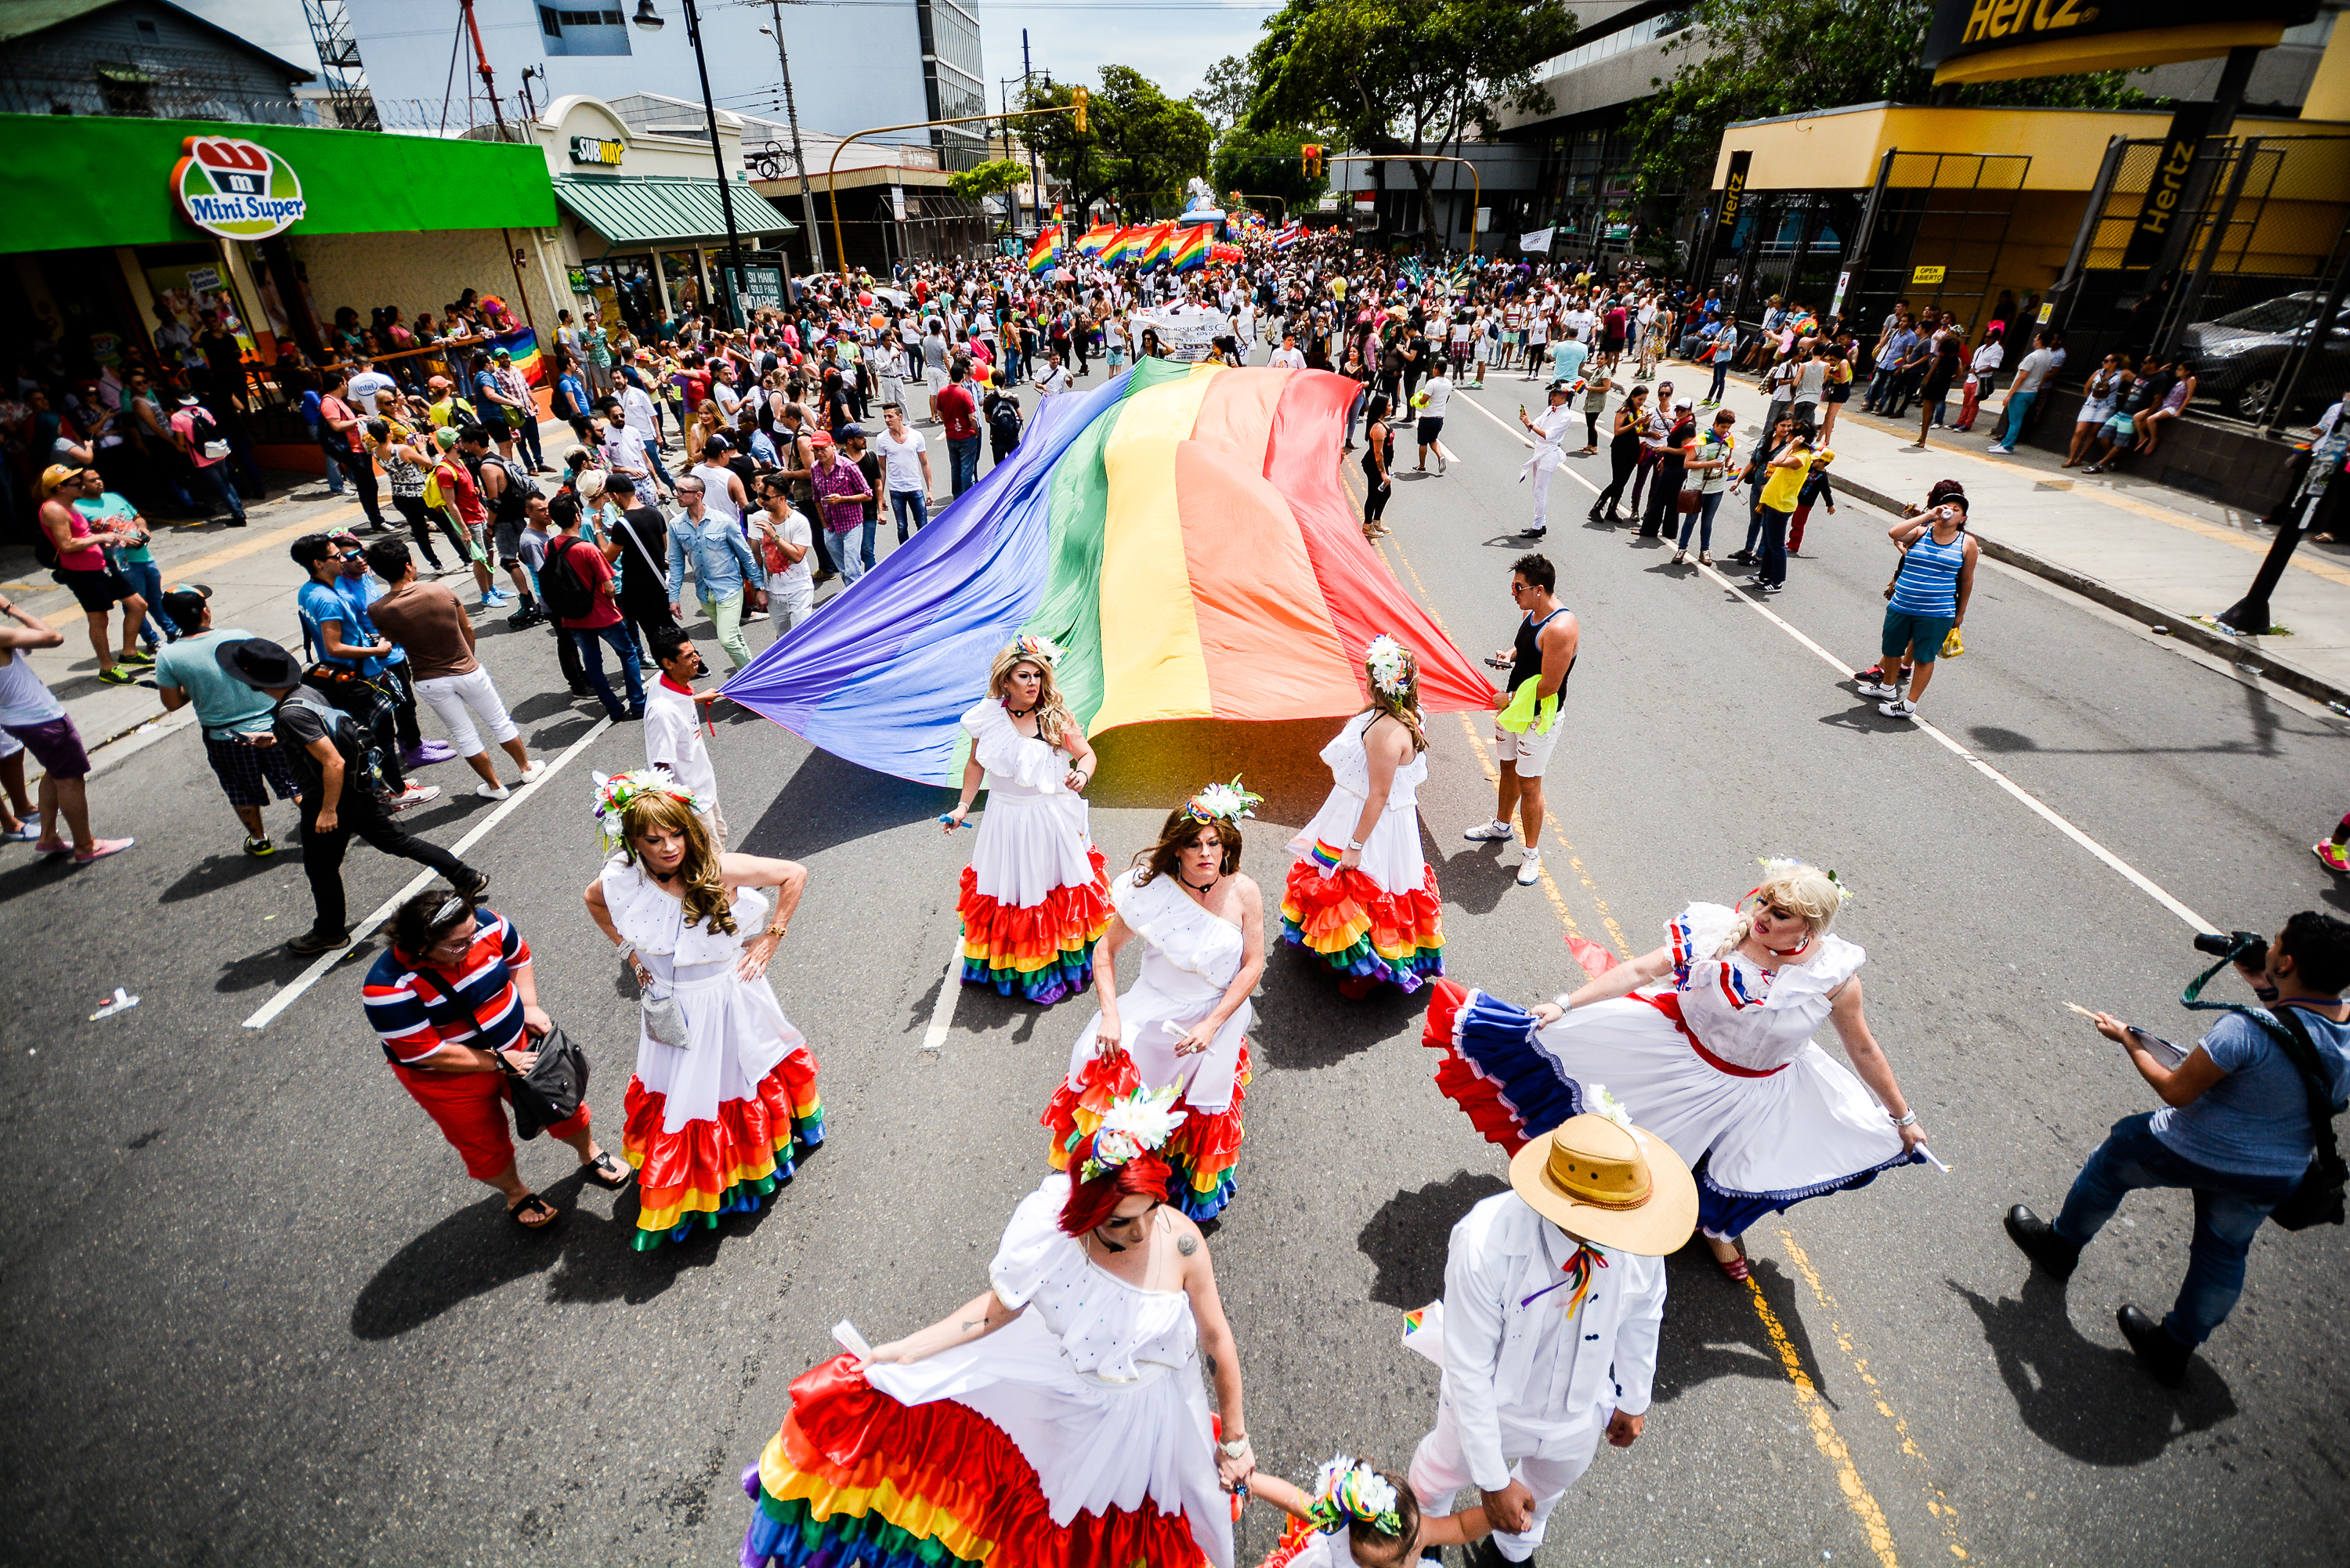 People in traditional Costa Rican dresses dancing at the Pride Parade in San Jose, Costa Rica